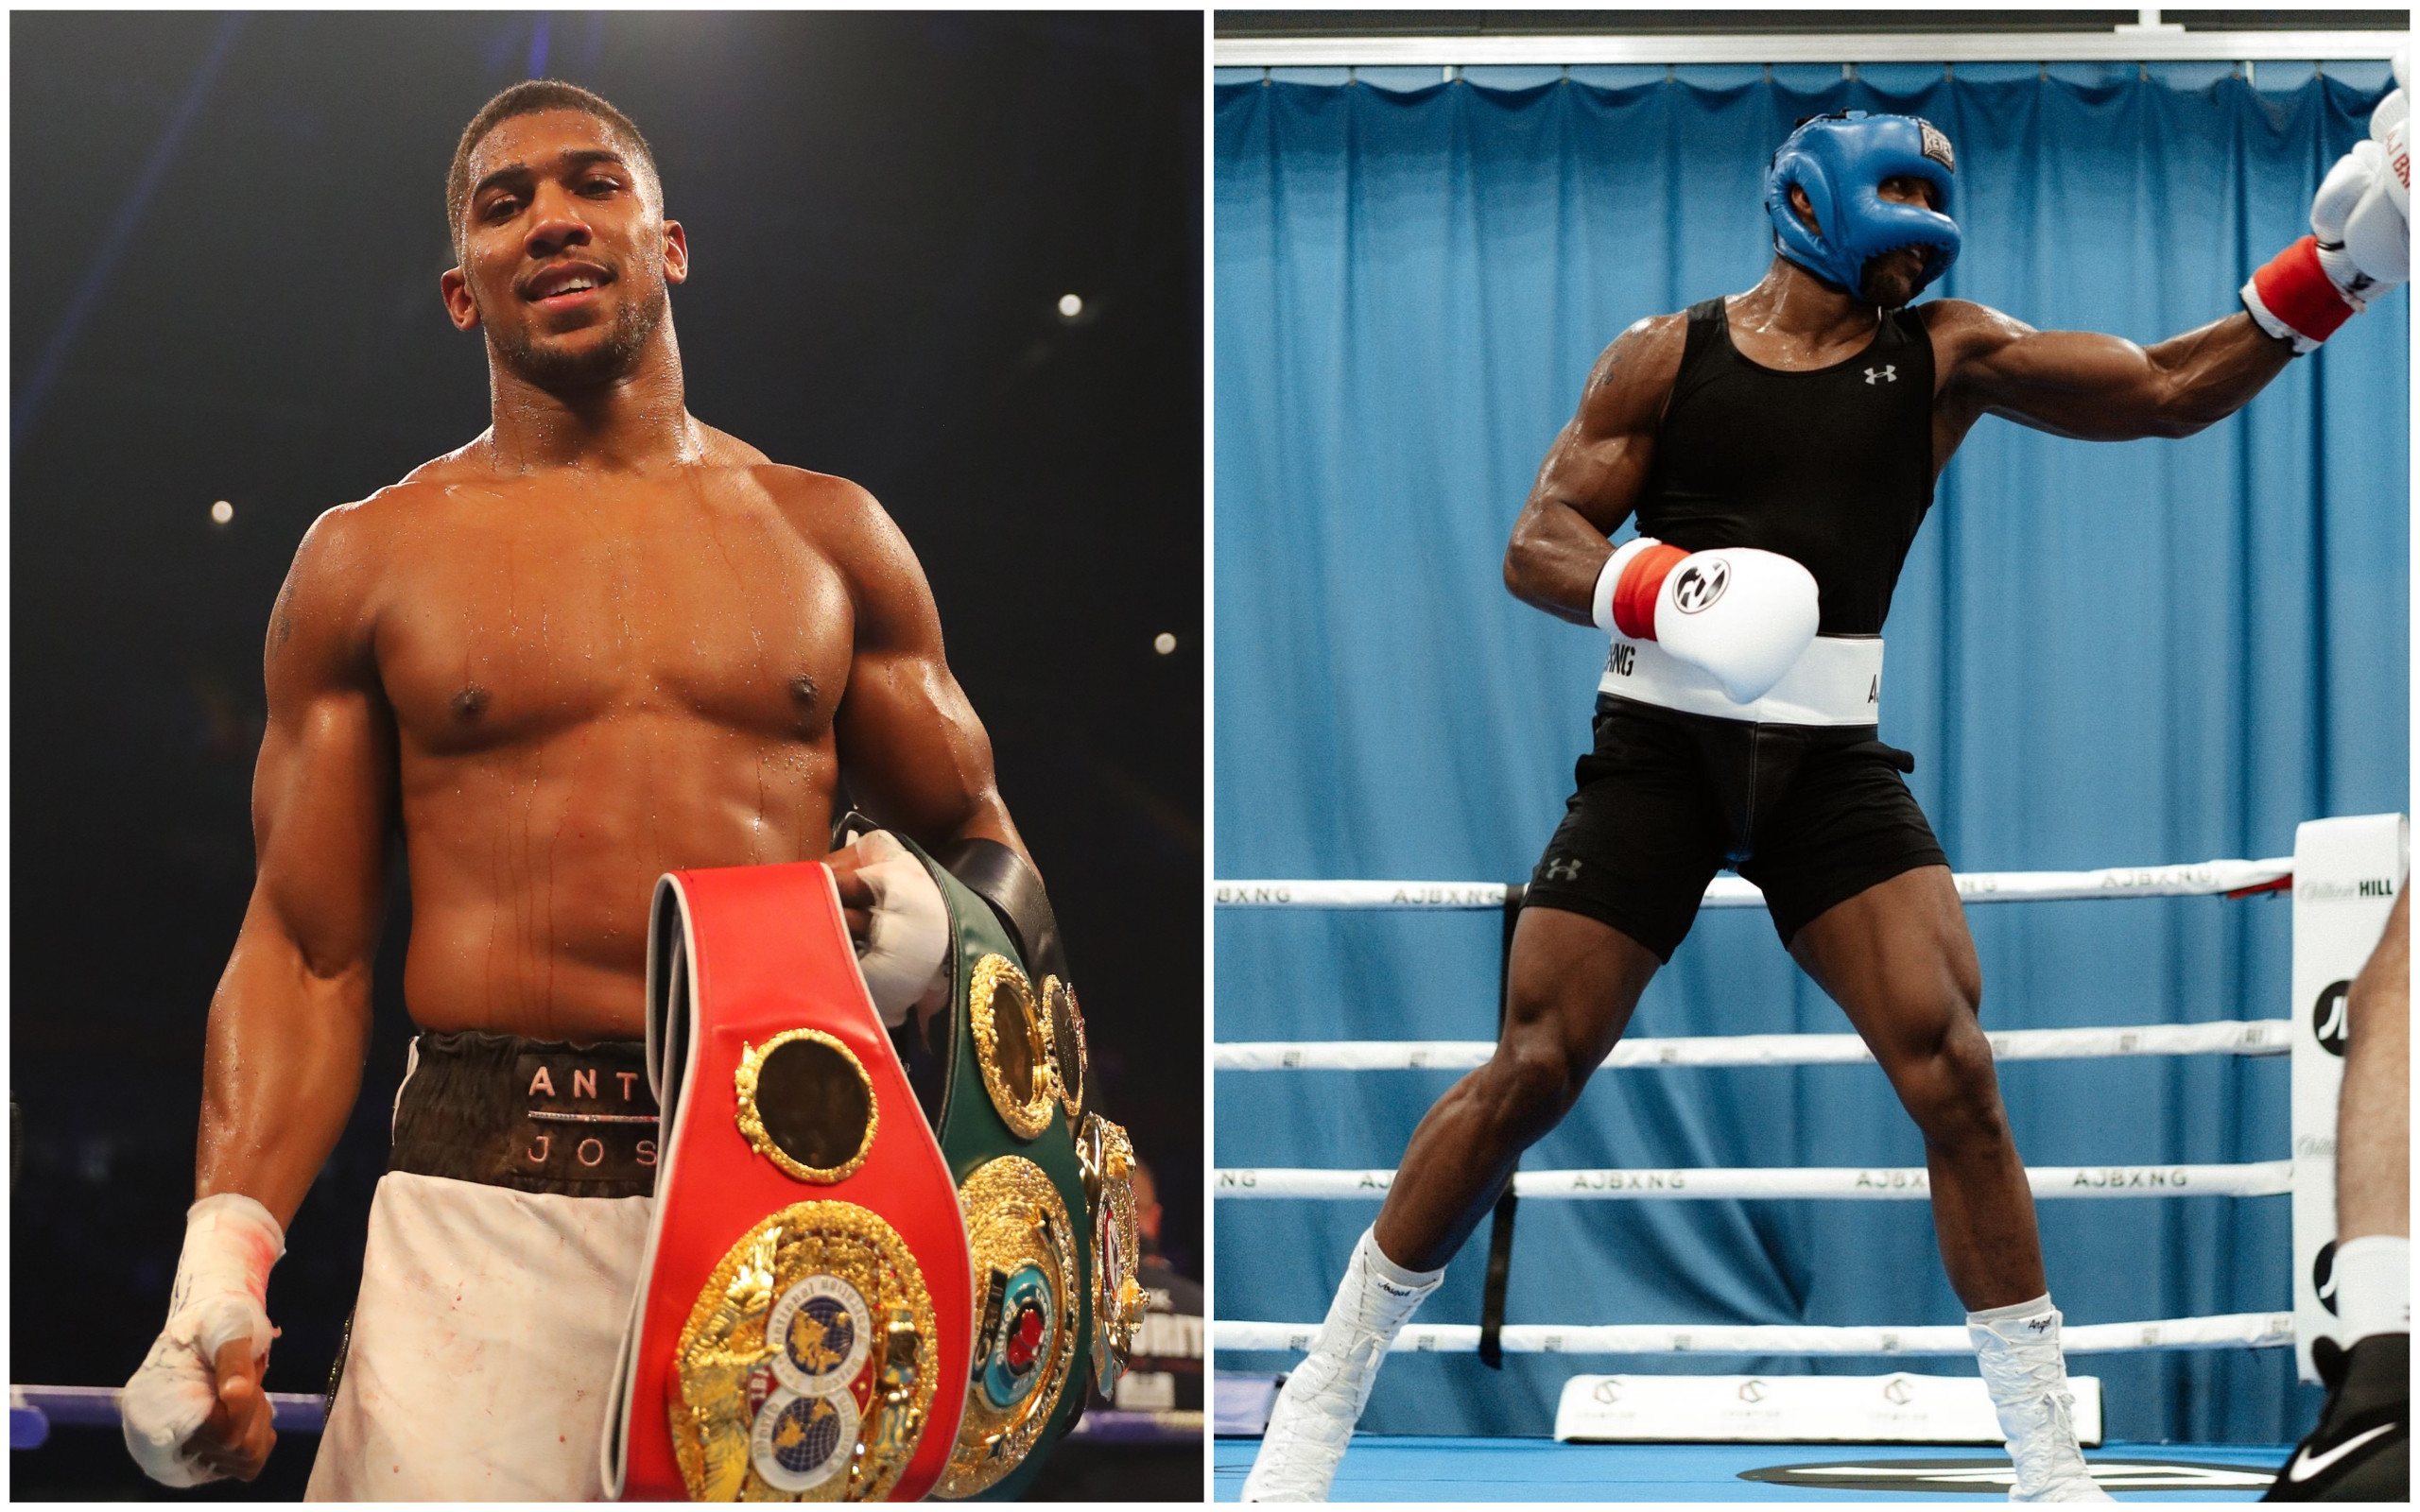 Anthony Joshua shows off new lean physique ahead of Oleksandr Usyk showdown